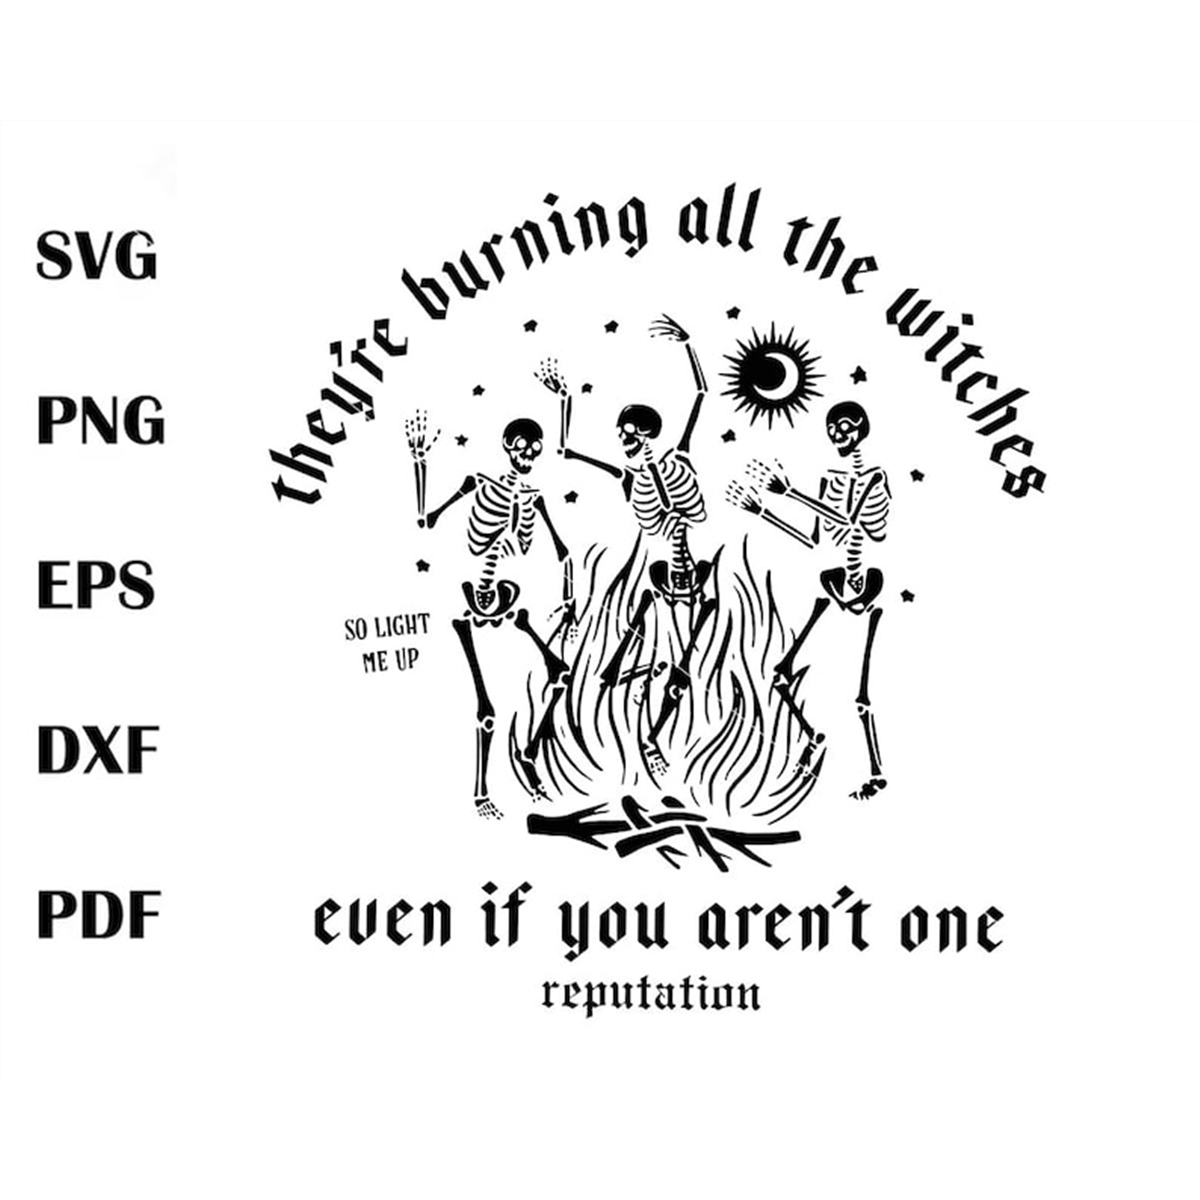 theyre-burning-all-the-witches-svg-reputation-svg-taylor-image-1